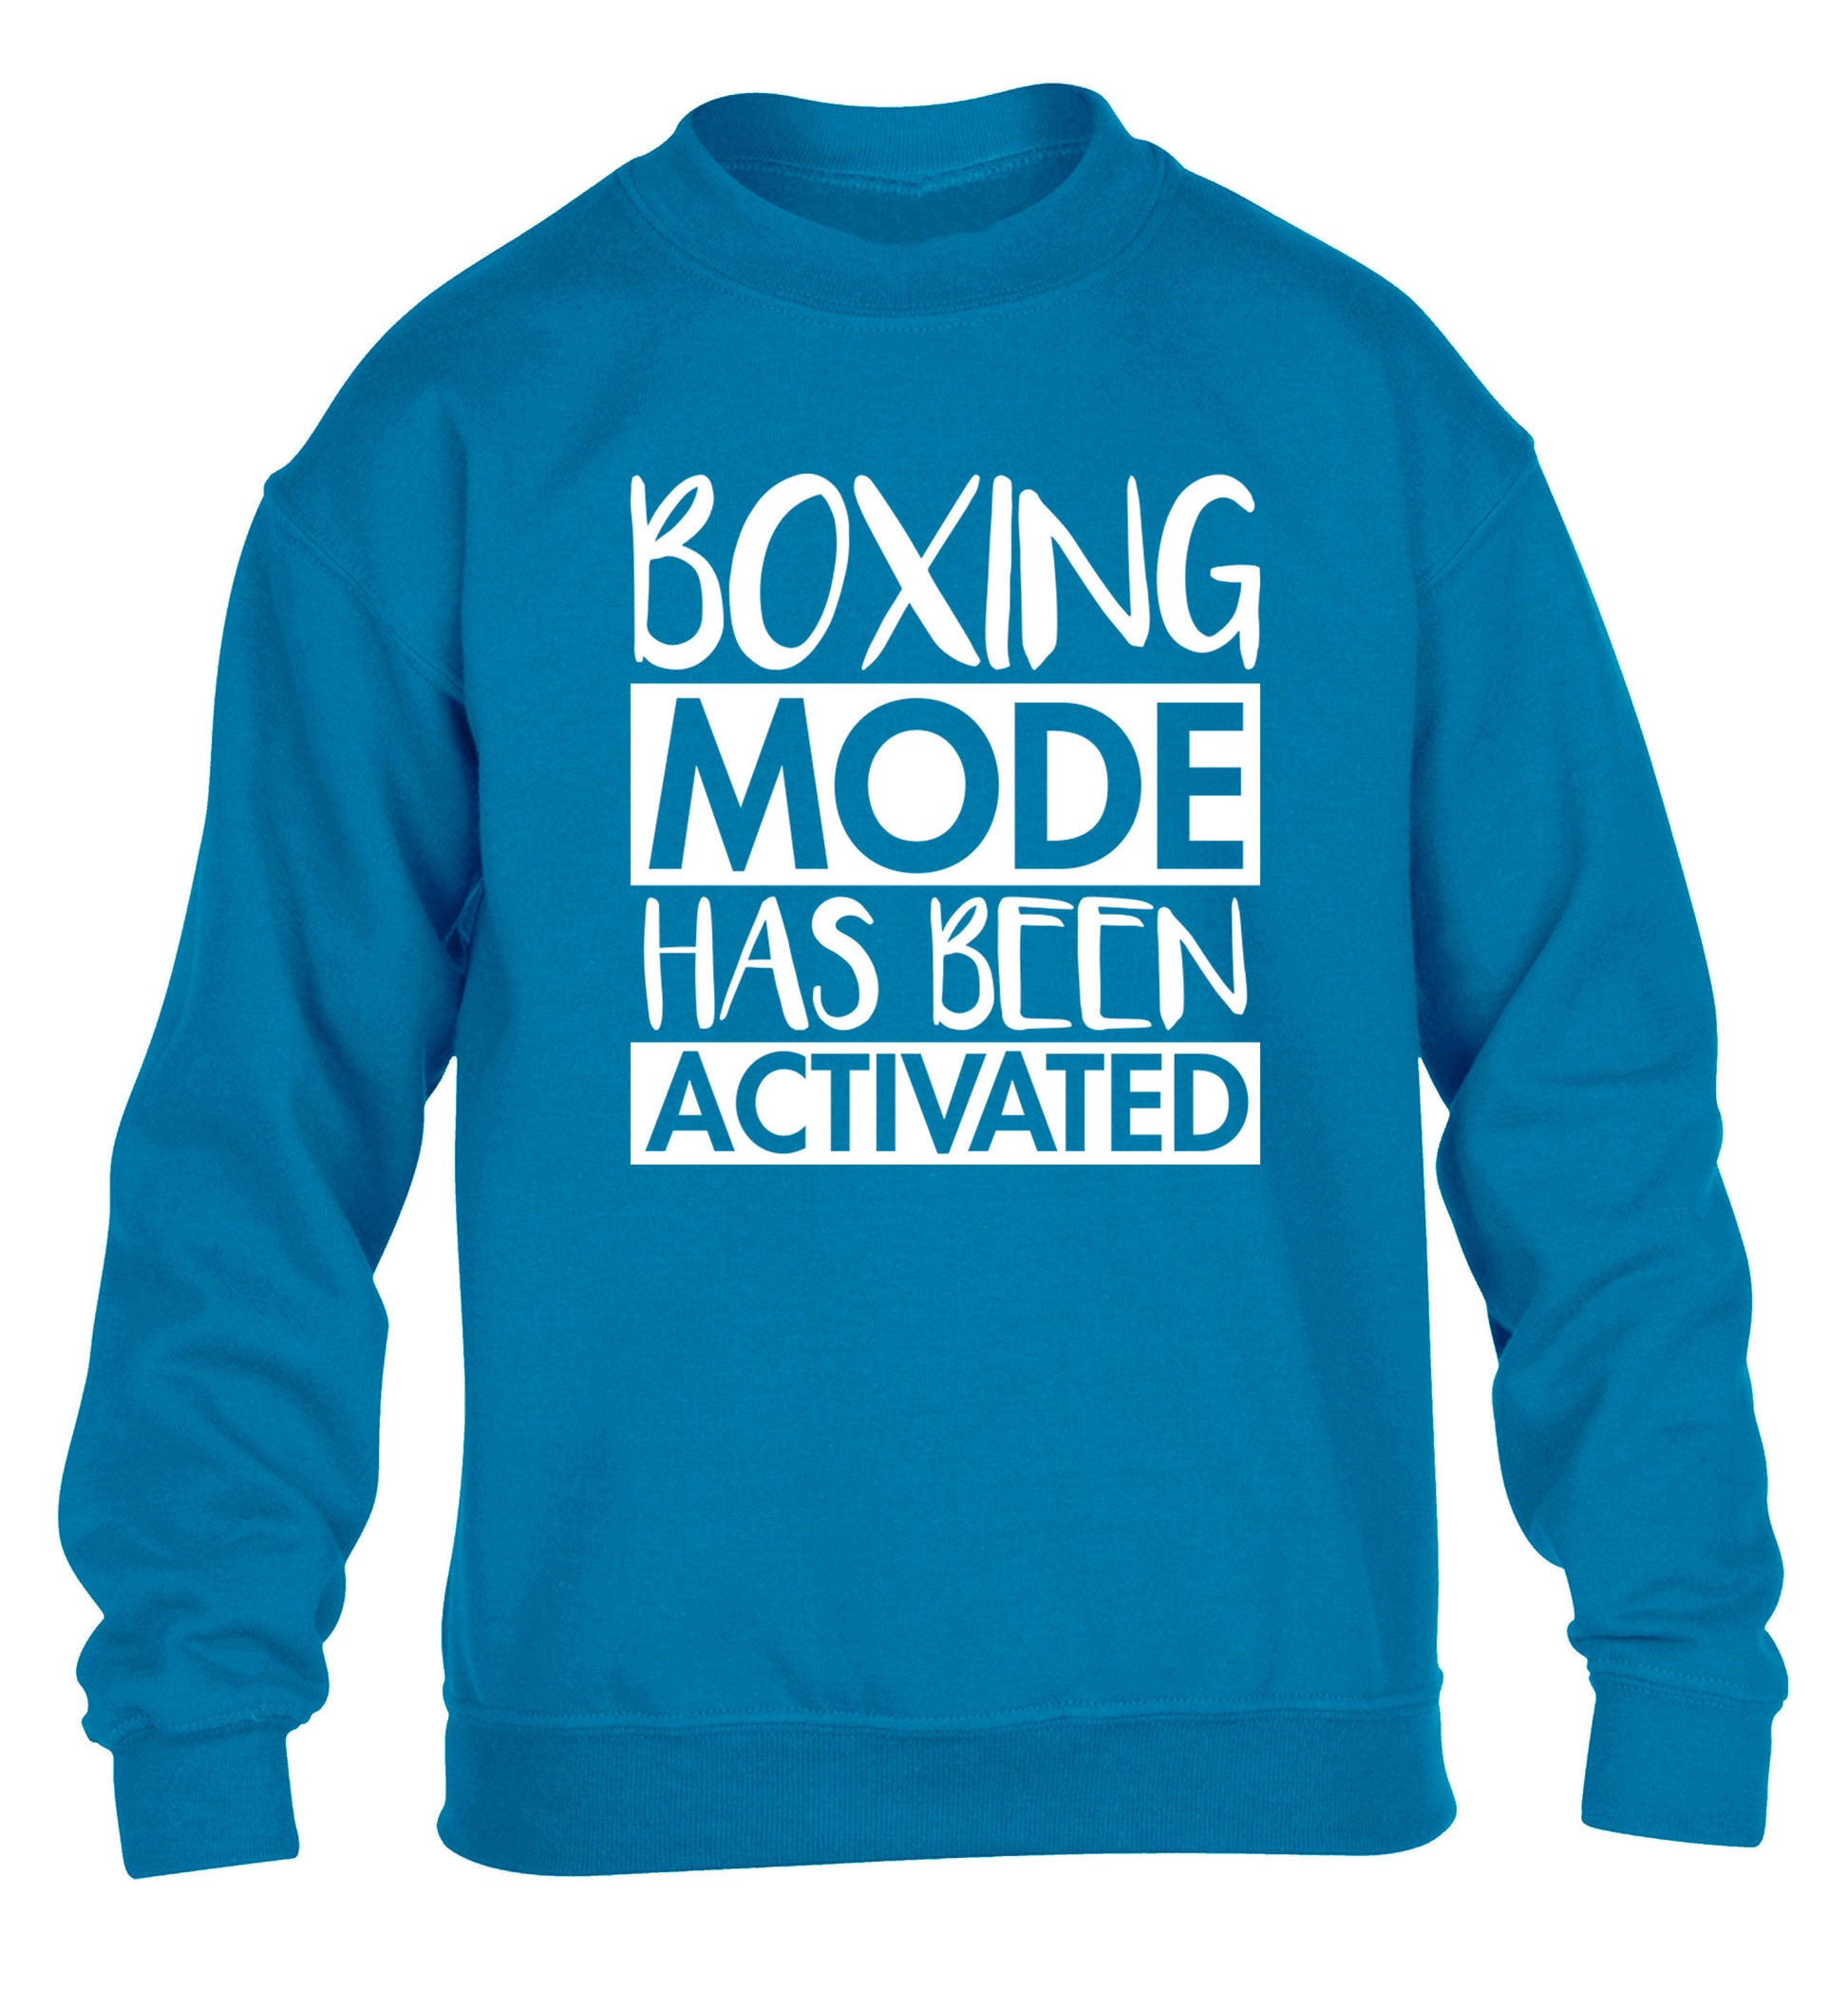 Boxing mode activated children's blue sweater 12-14 Years